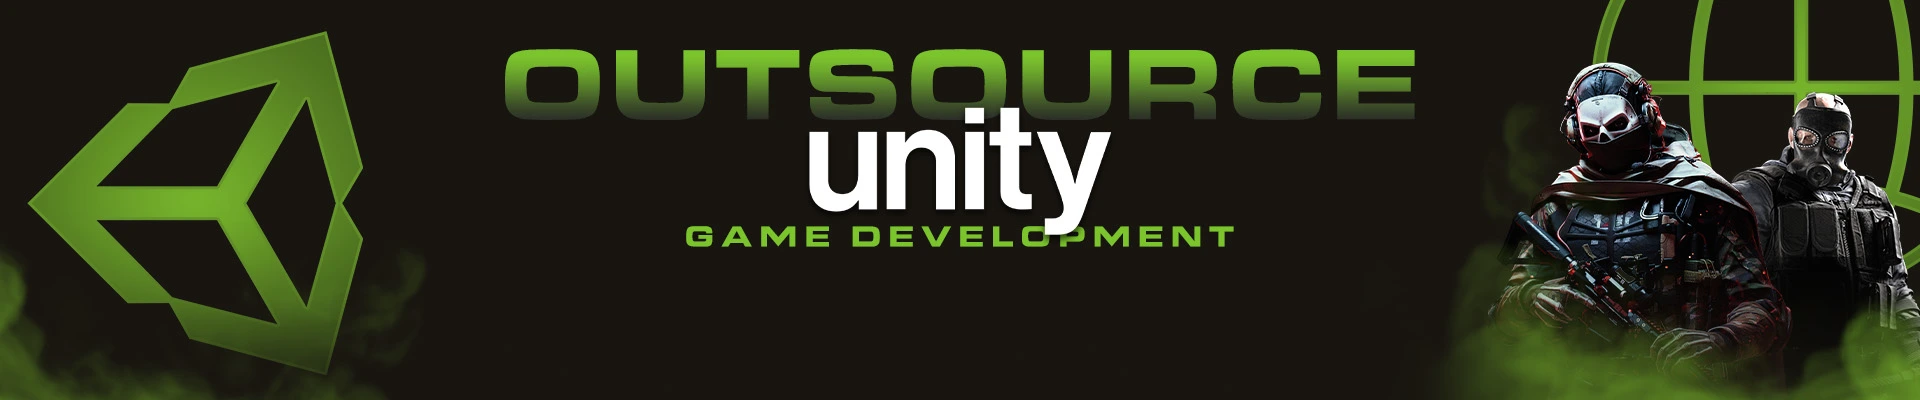 Outsource Unity Game Development